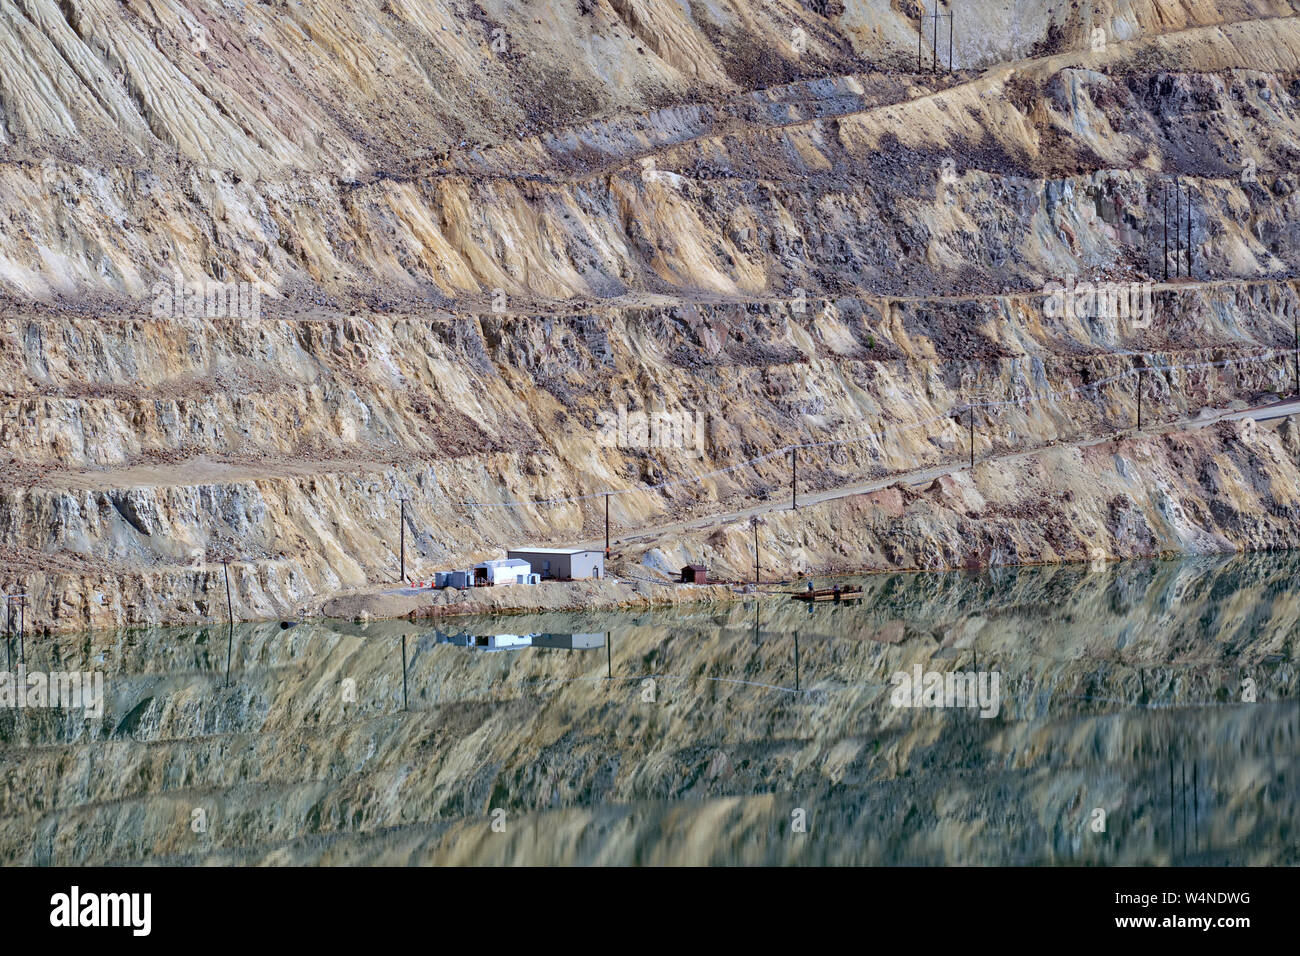 Ground- and surface water filling the Berkeley Pit, an abandoned open pit copper-molybdenum mine in Butte, Montana. Stock Photo